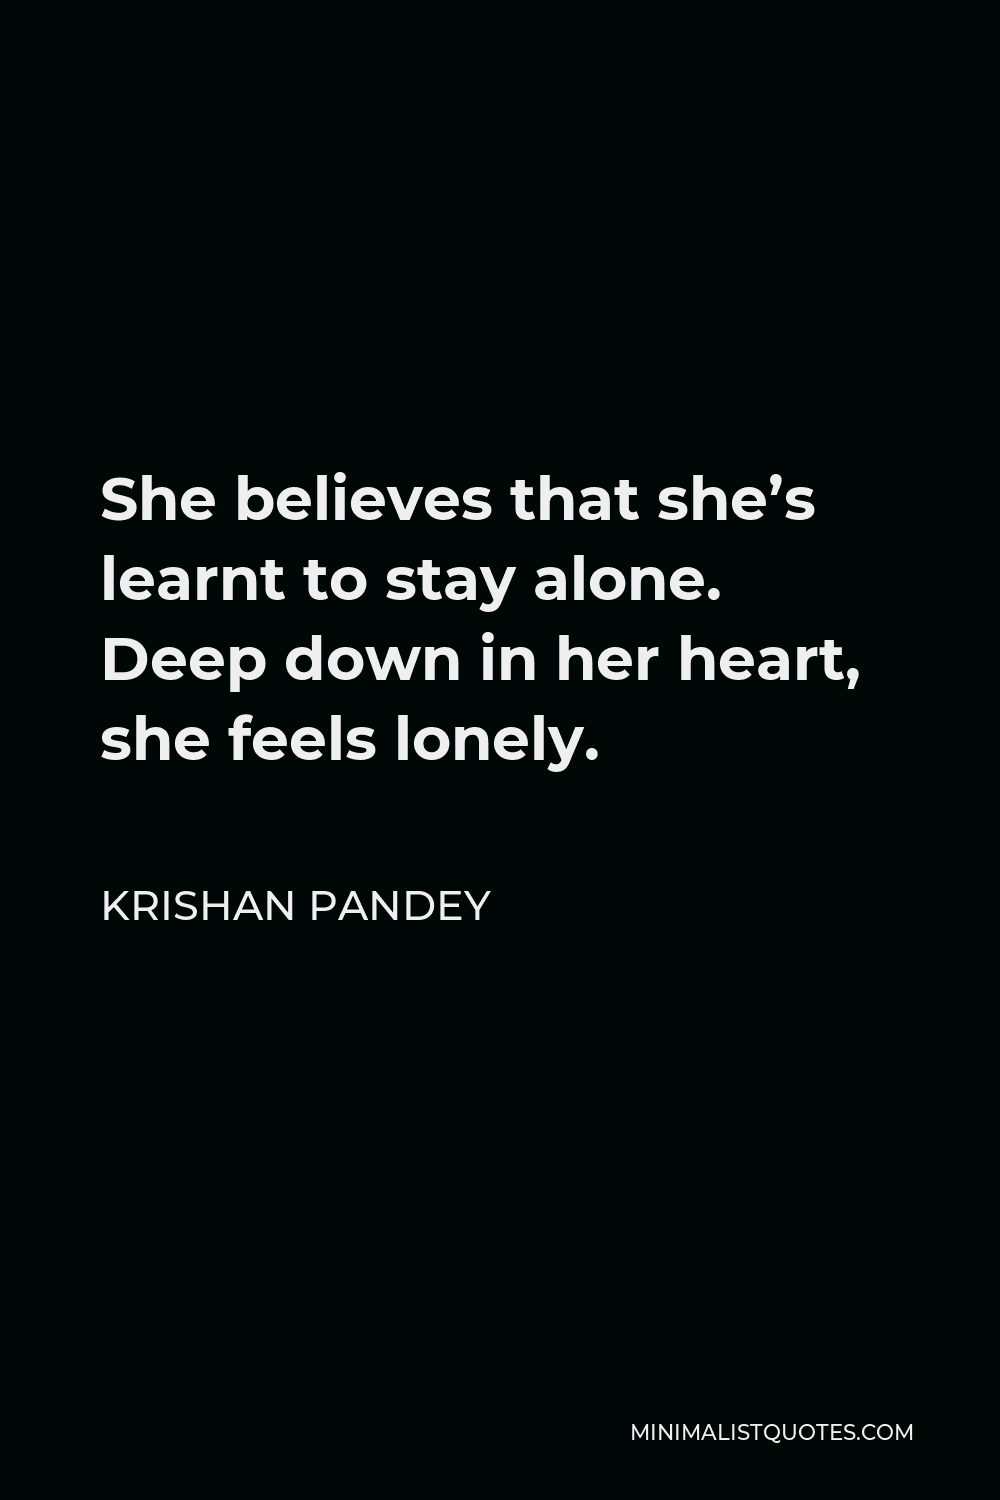 Krishan Pandey Quote - She believes that she’s learnt to stay alone. Deep down in her heart, she feels lonely.